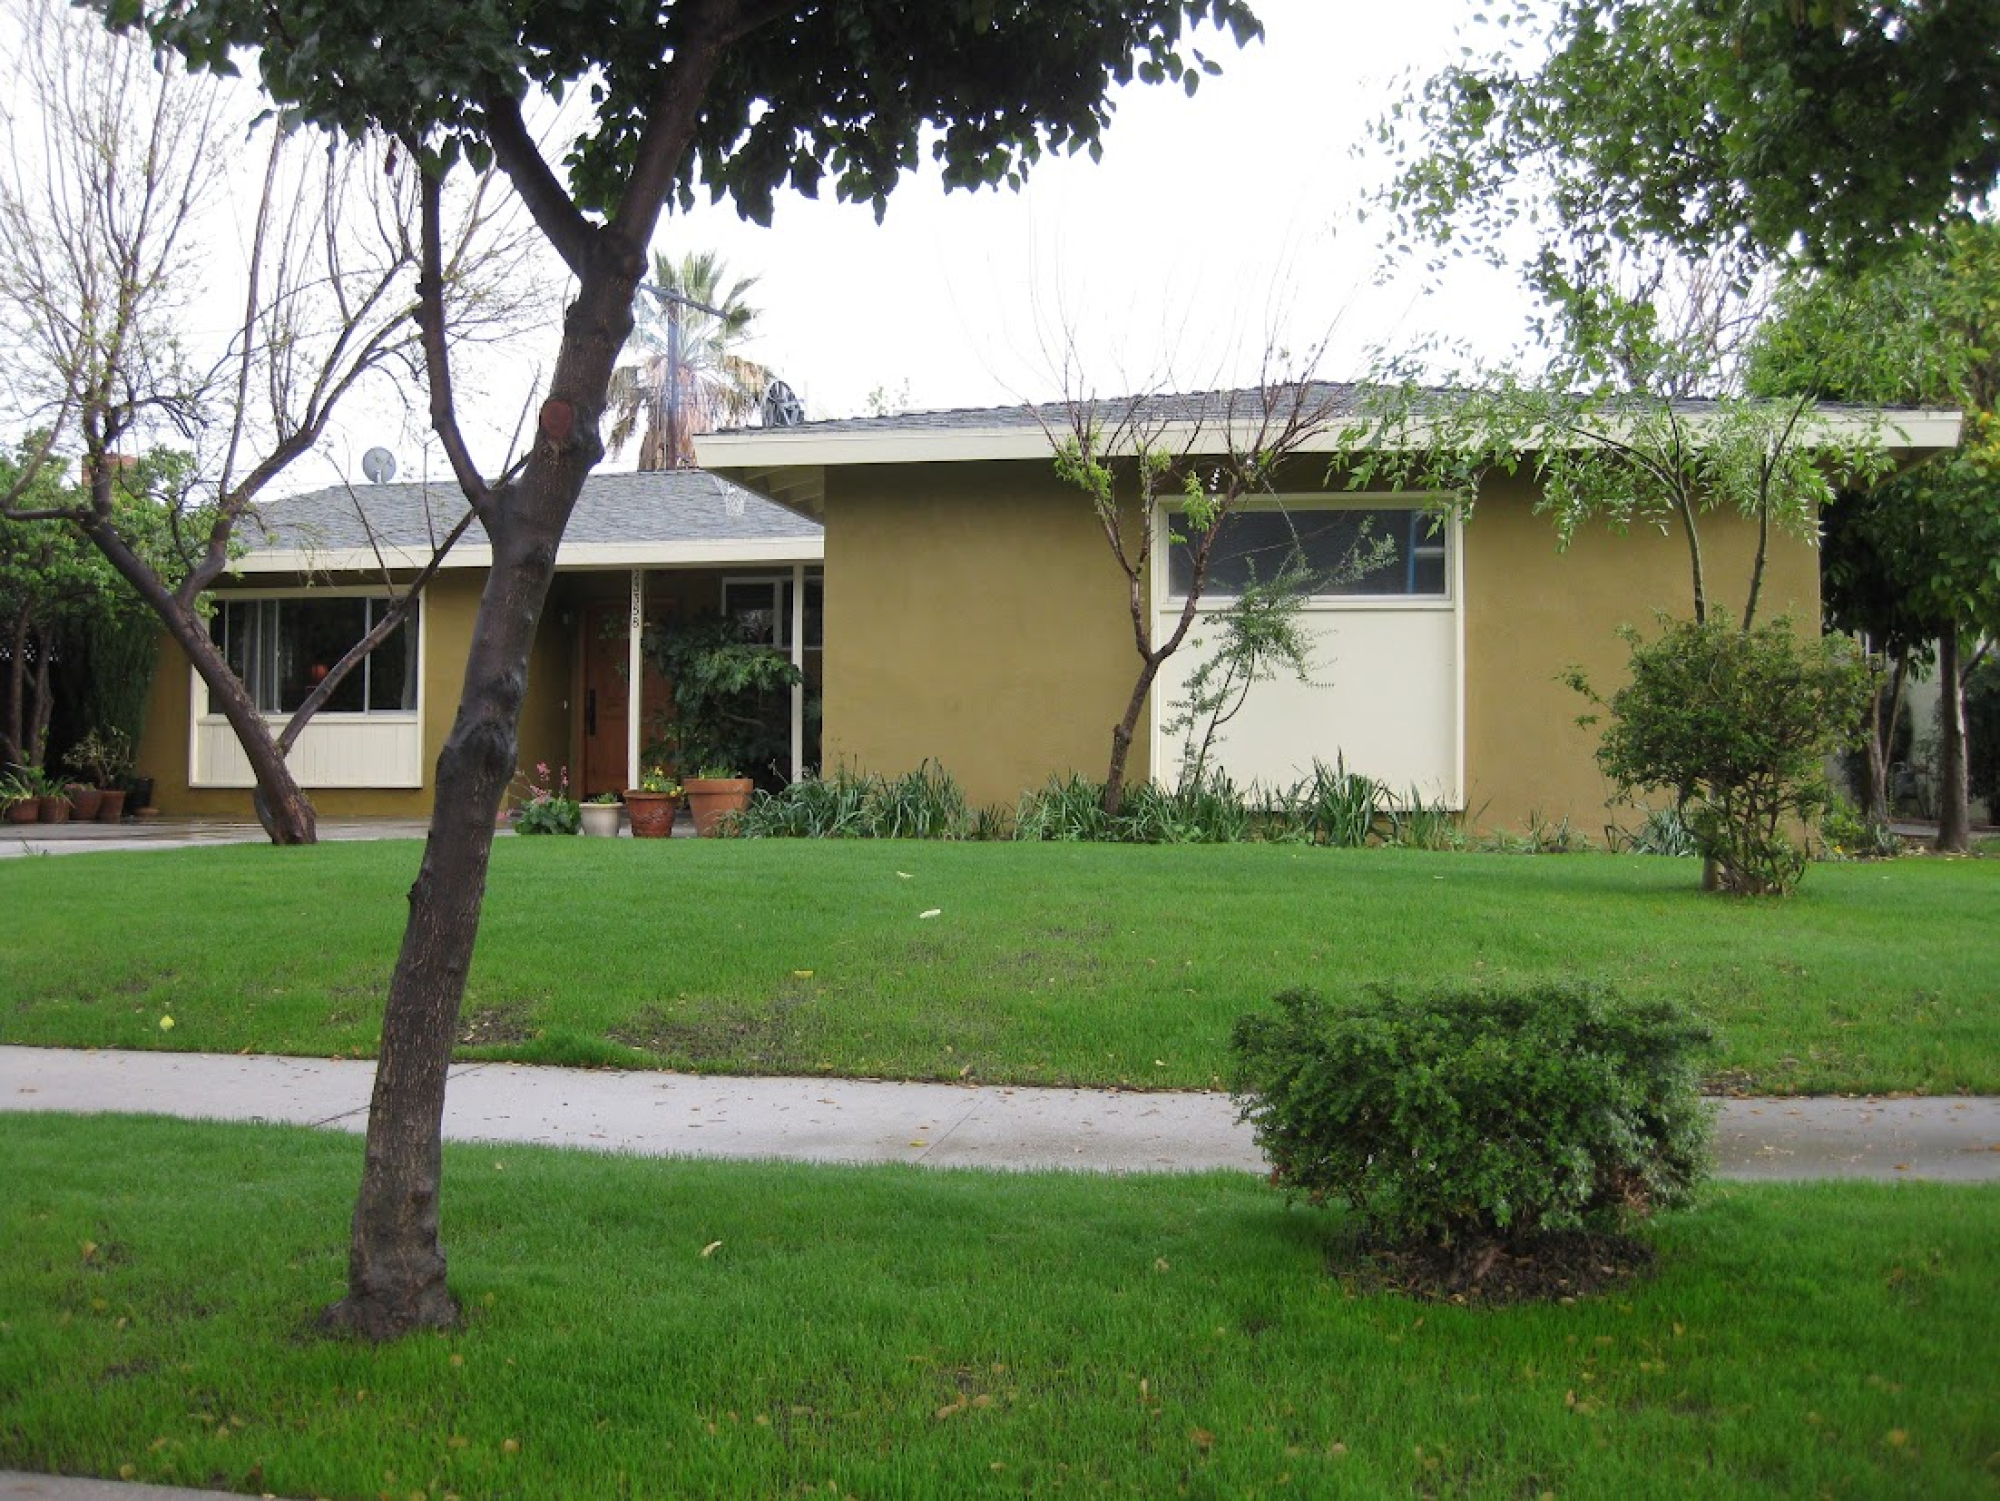 A green lawn in front of a mustard-colored suburban home 